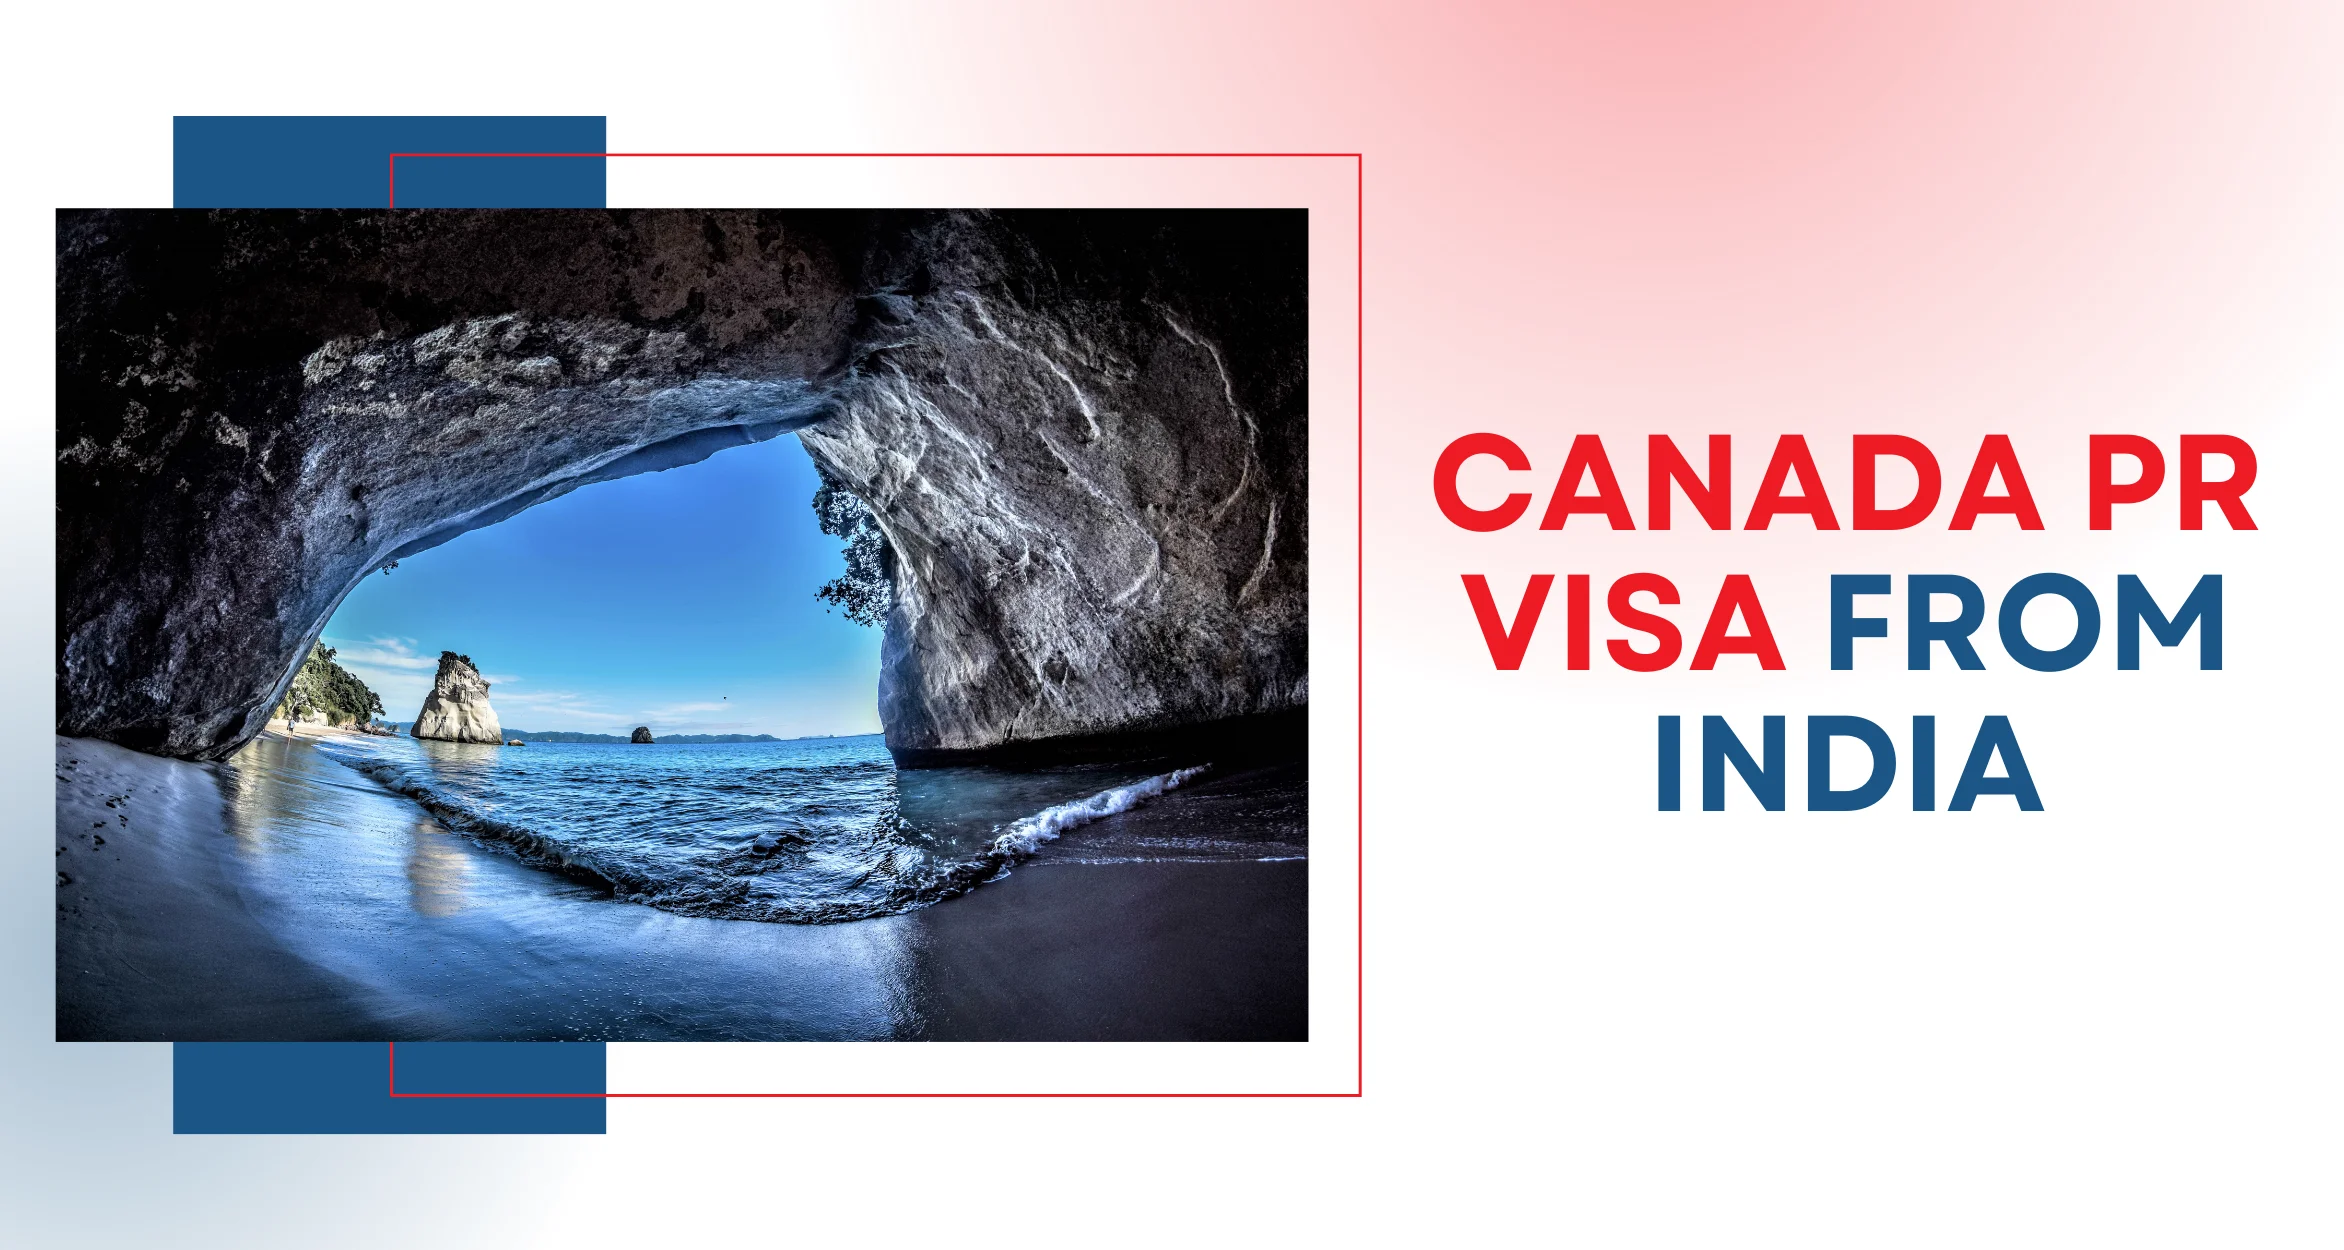 Canada PR Visa from India – Canadian Permanent Residency